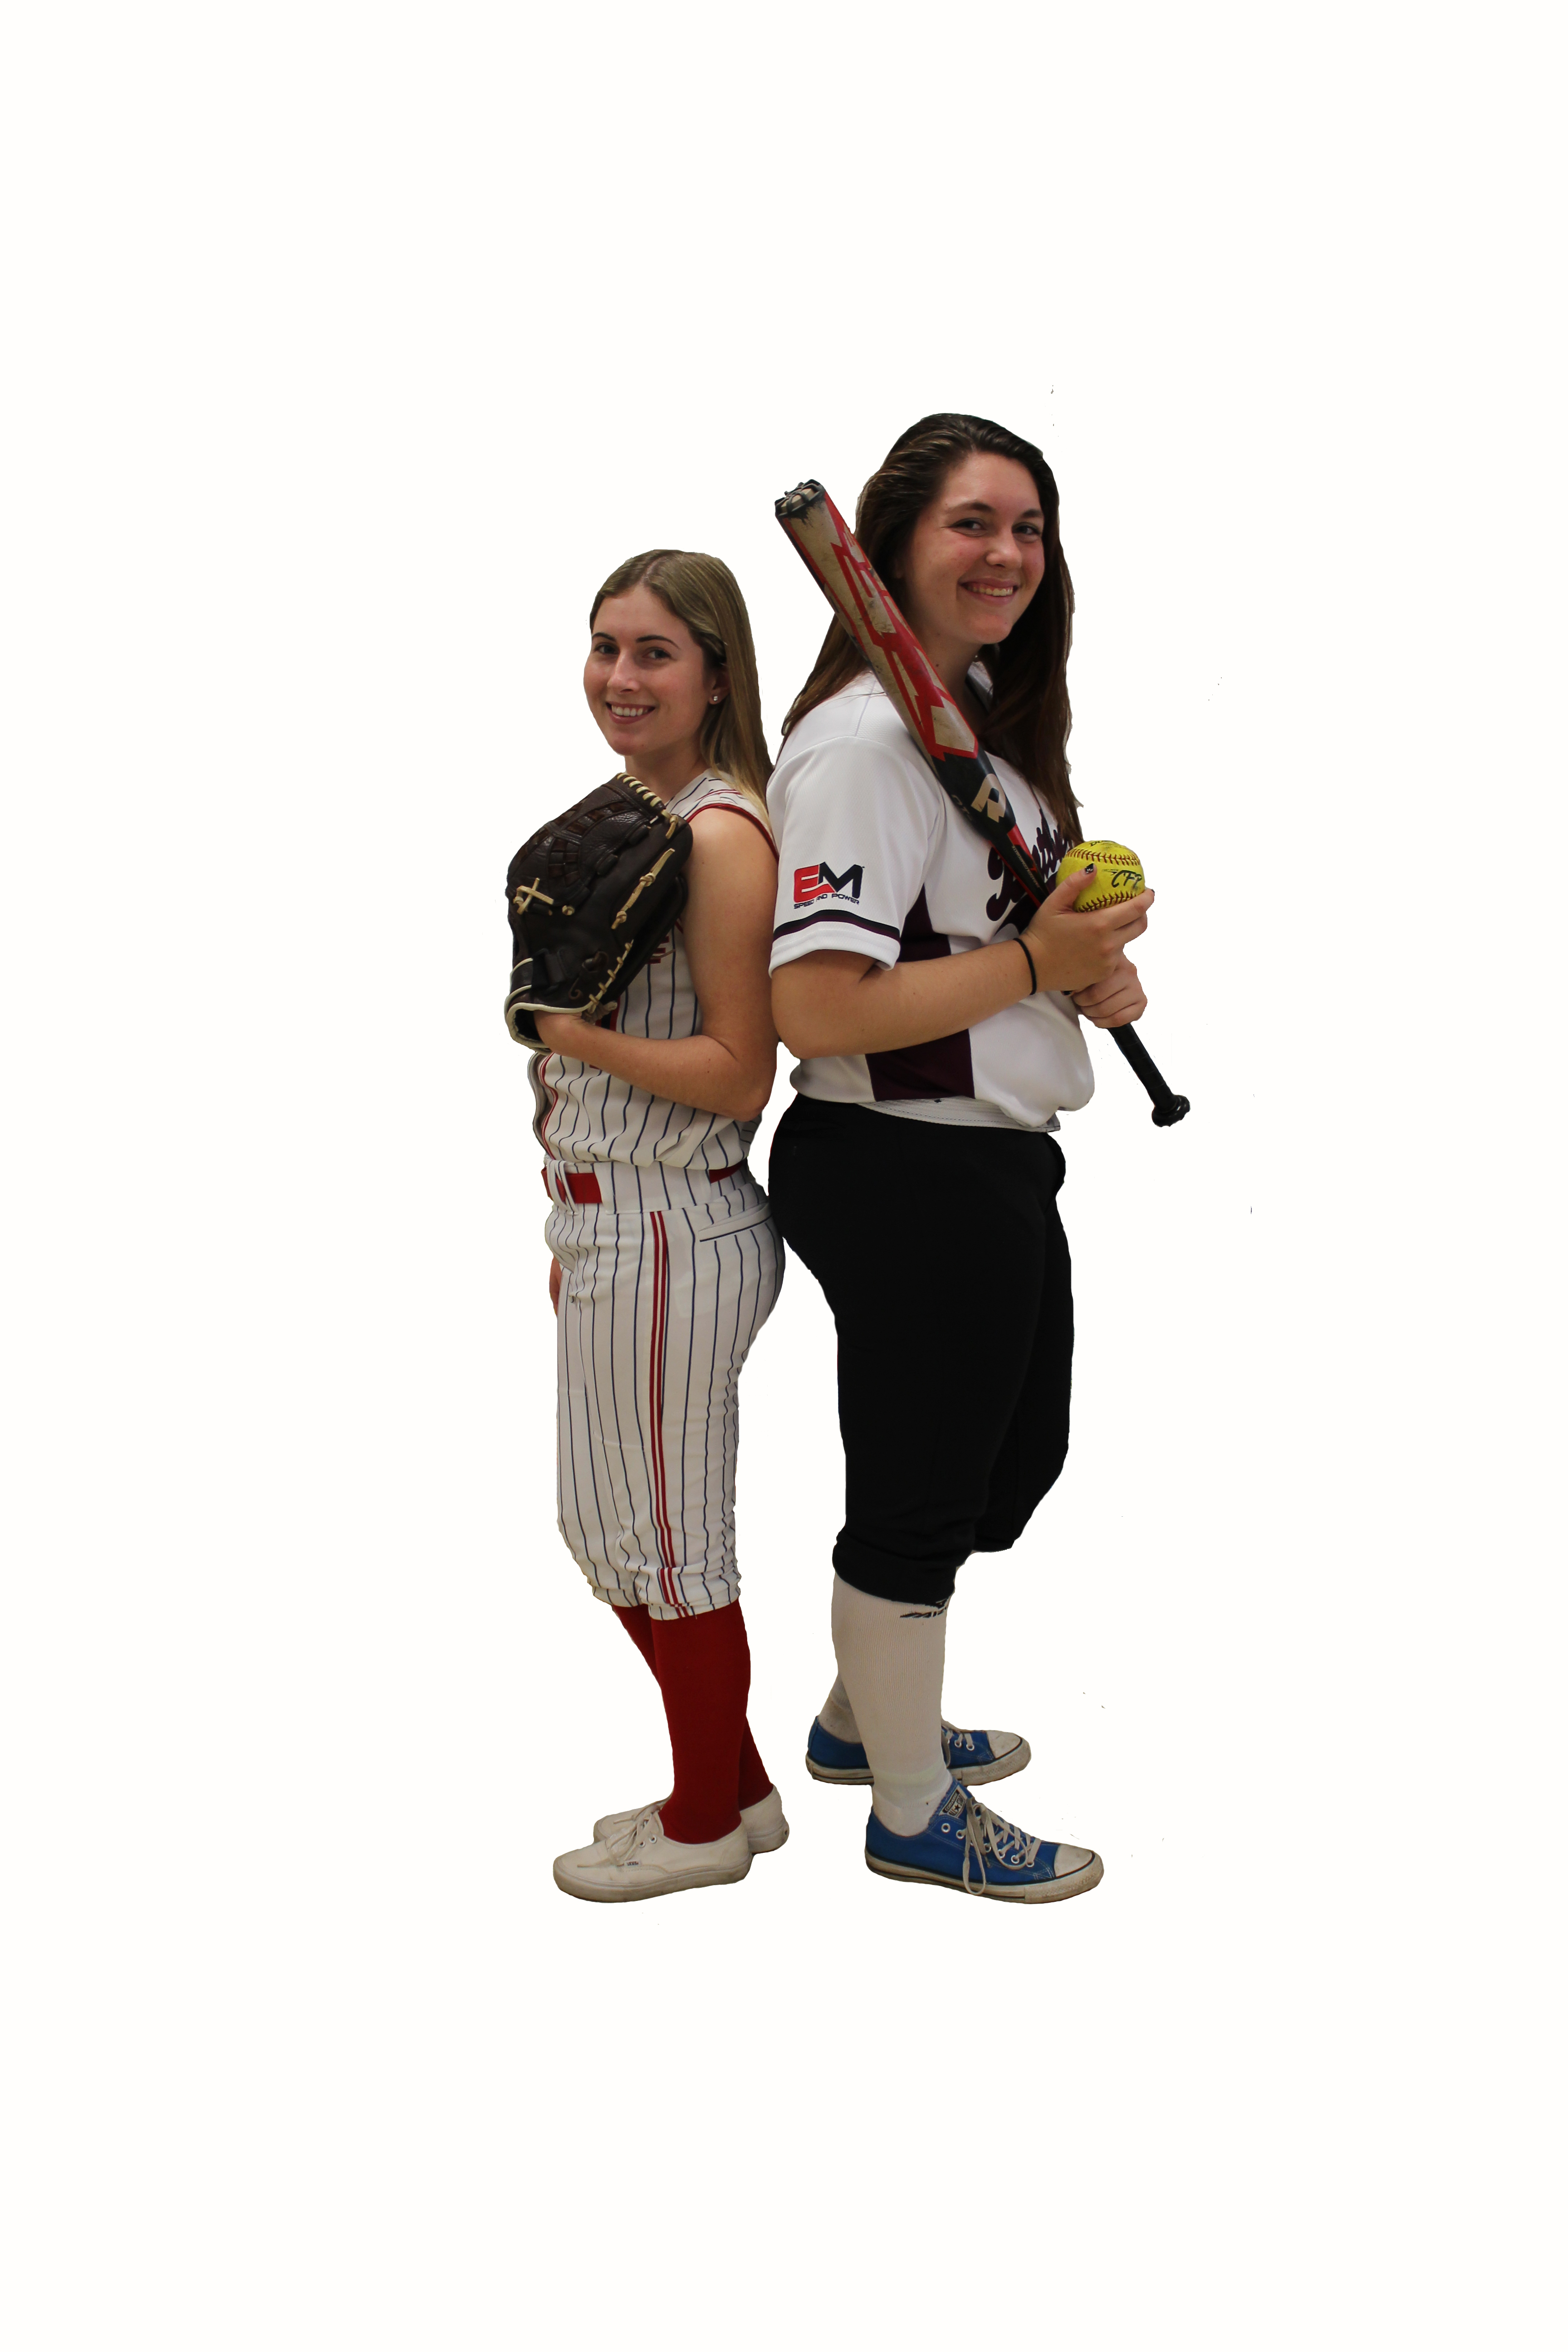 Mitchell, Singer commit to college softball scholarships